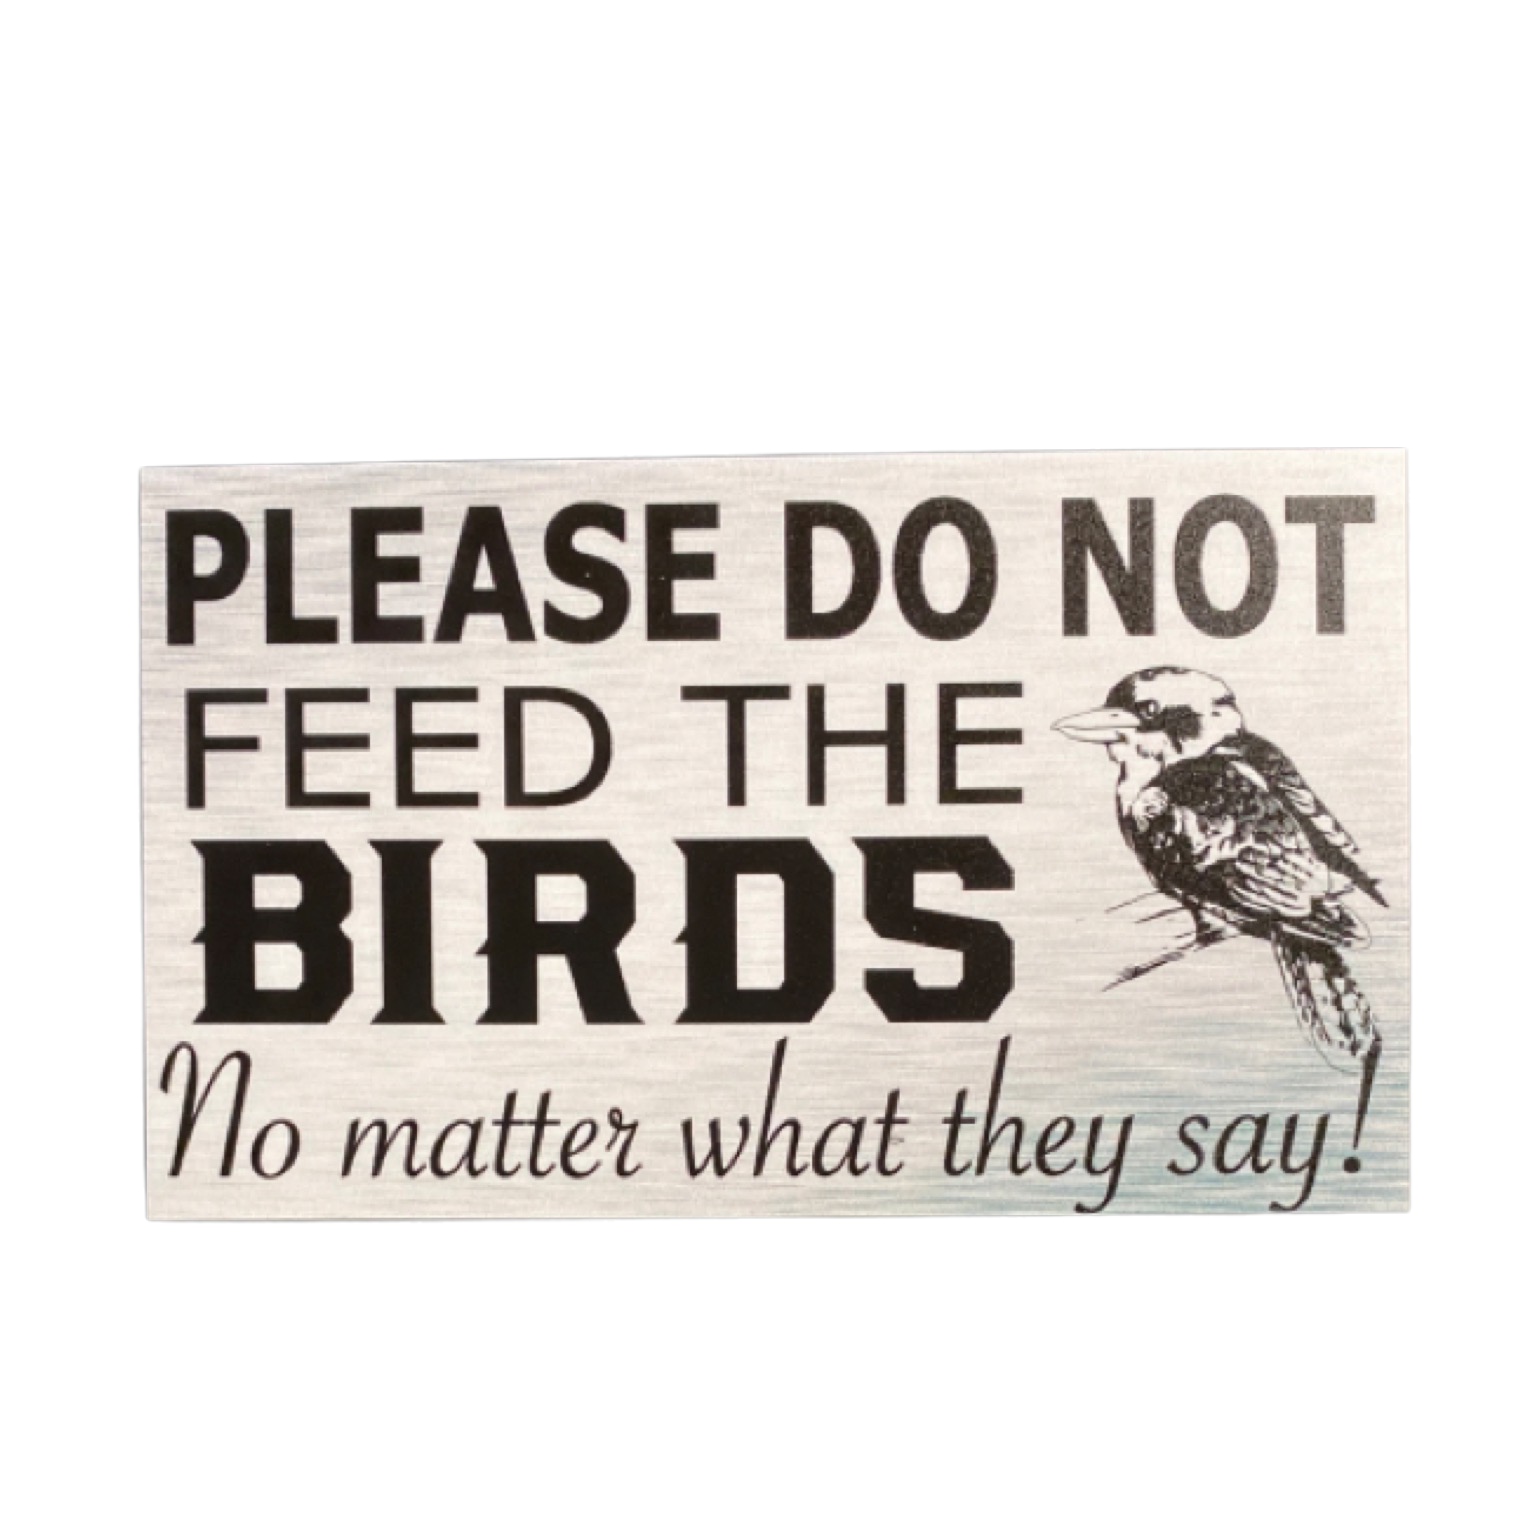 Do Not Feed The Birds Kookaburra Sign - The Renmy Store Homewares & Gifts 